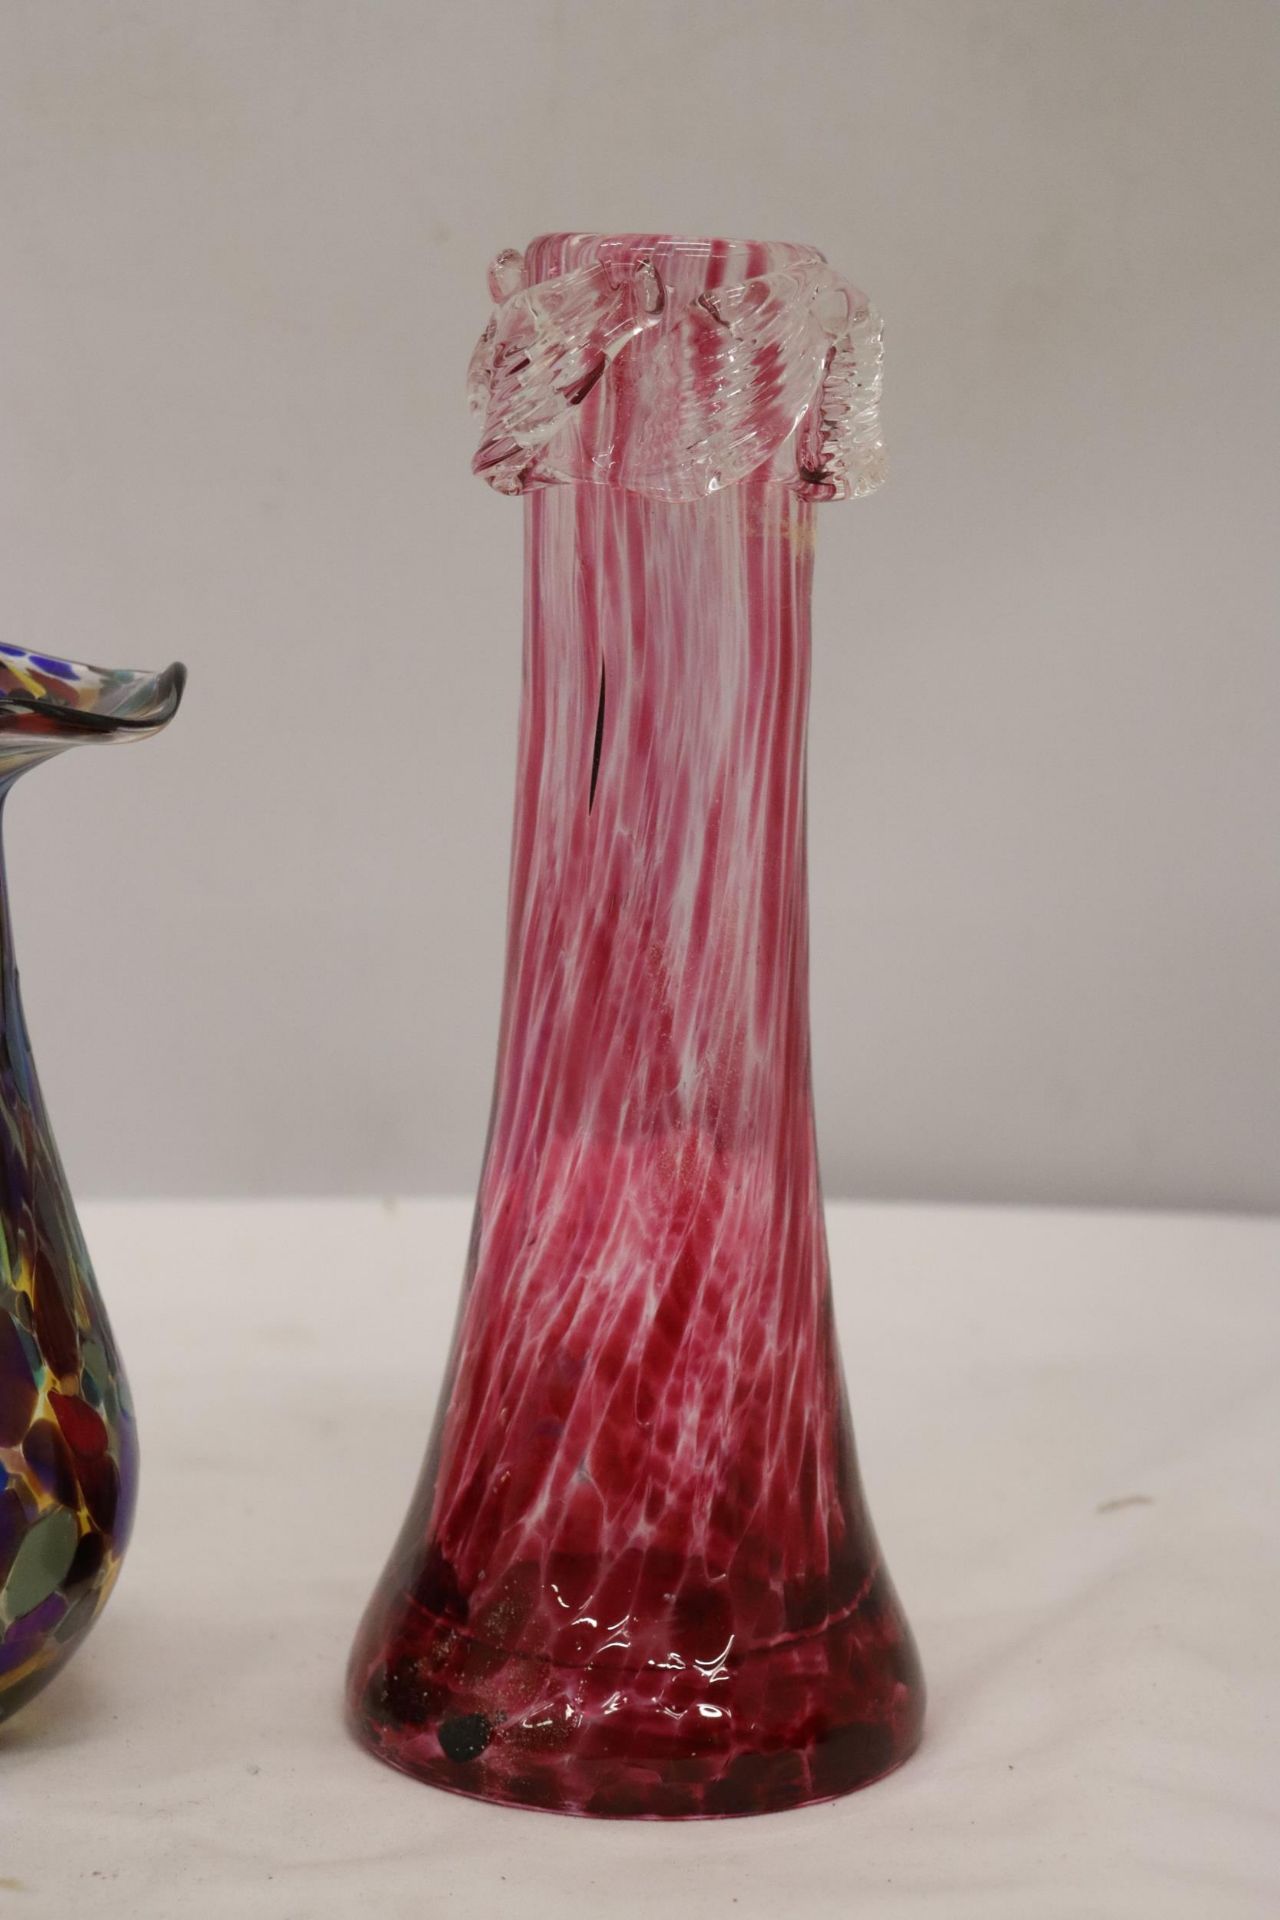 TWO PIECES OF VINTAGE CRANBERRY GLASS BOWLS PLUS TWO ART GLASS VASES - Image 6 of 7